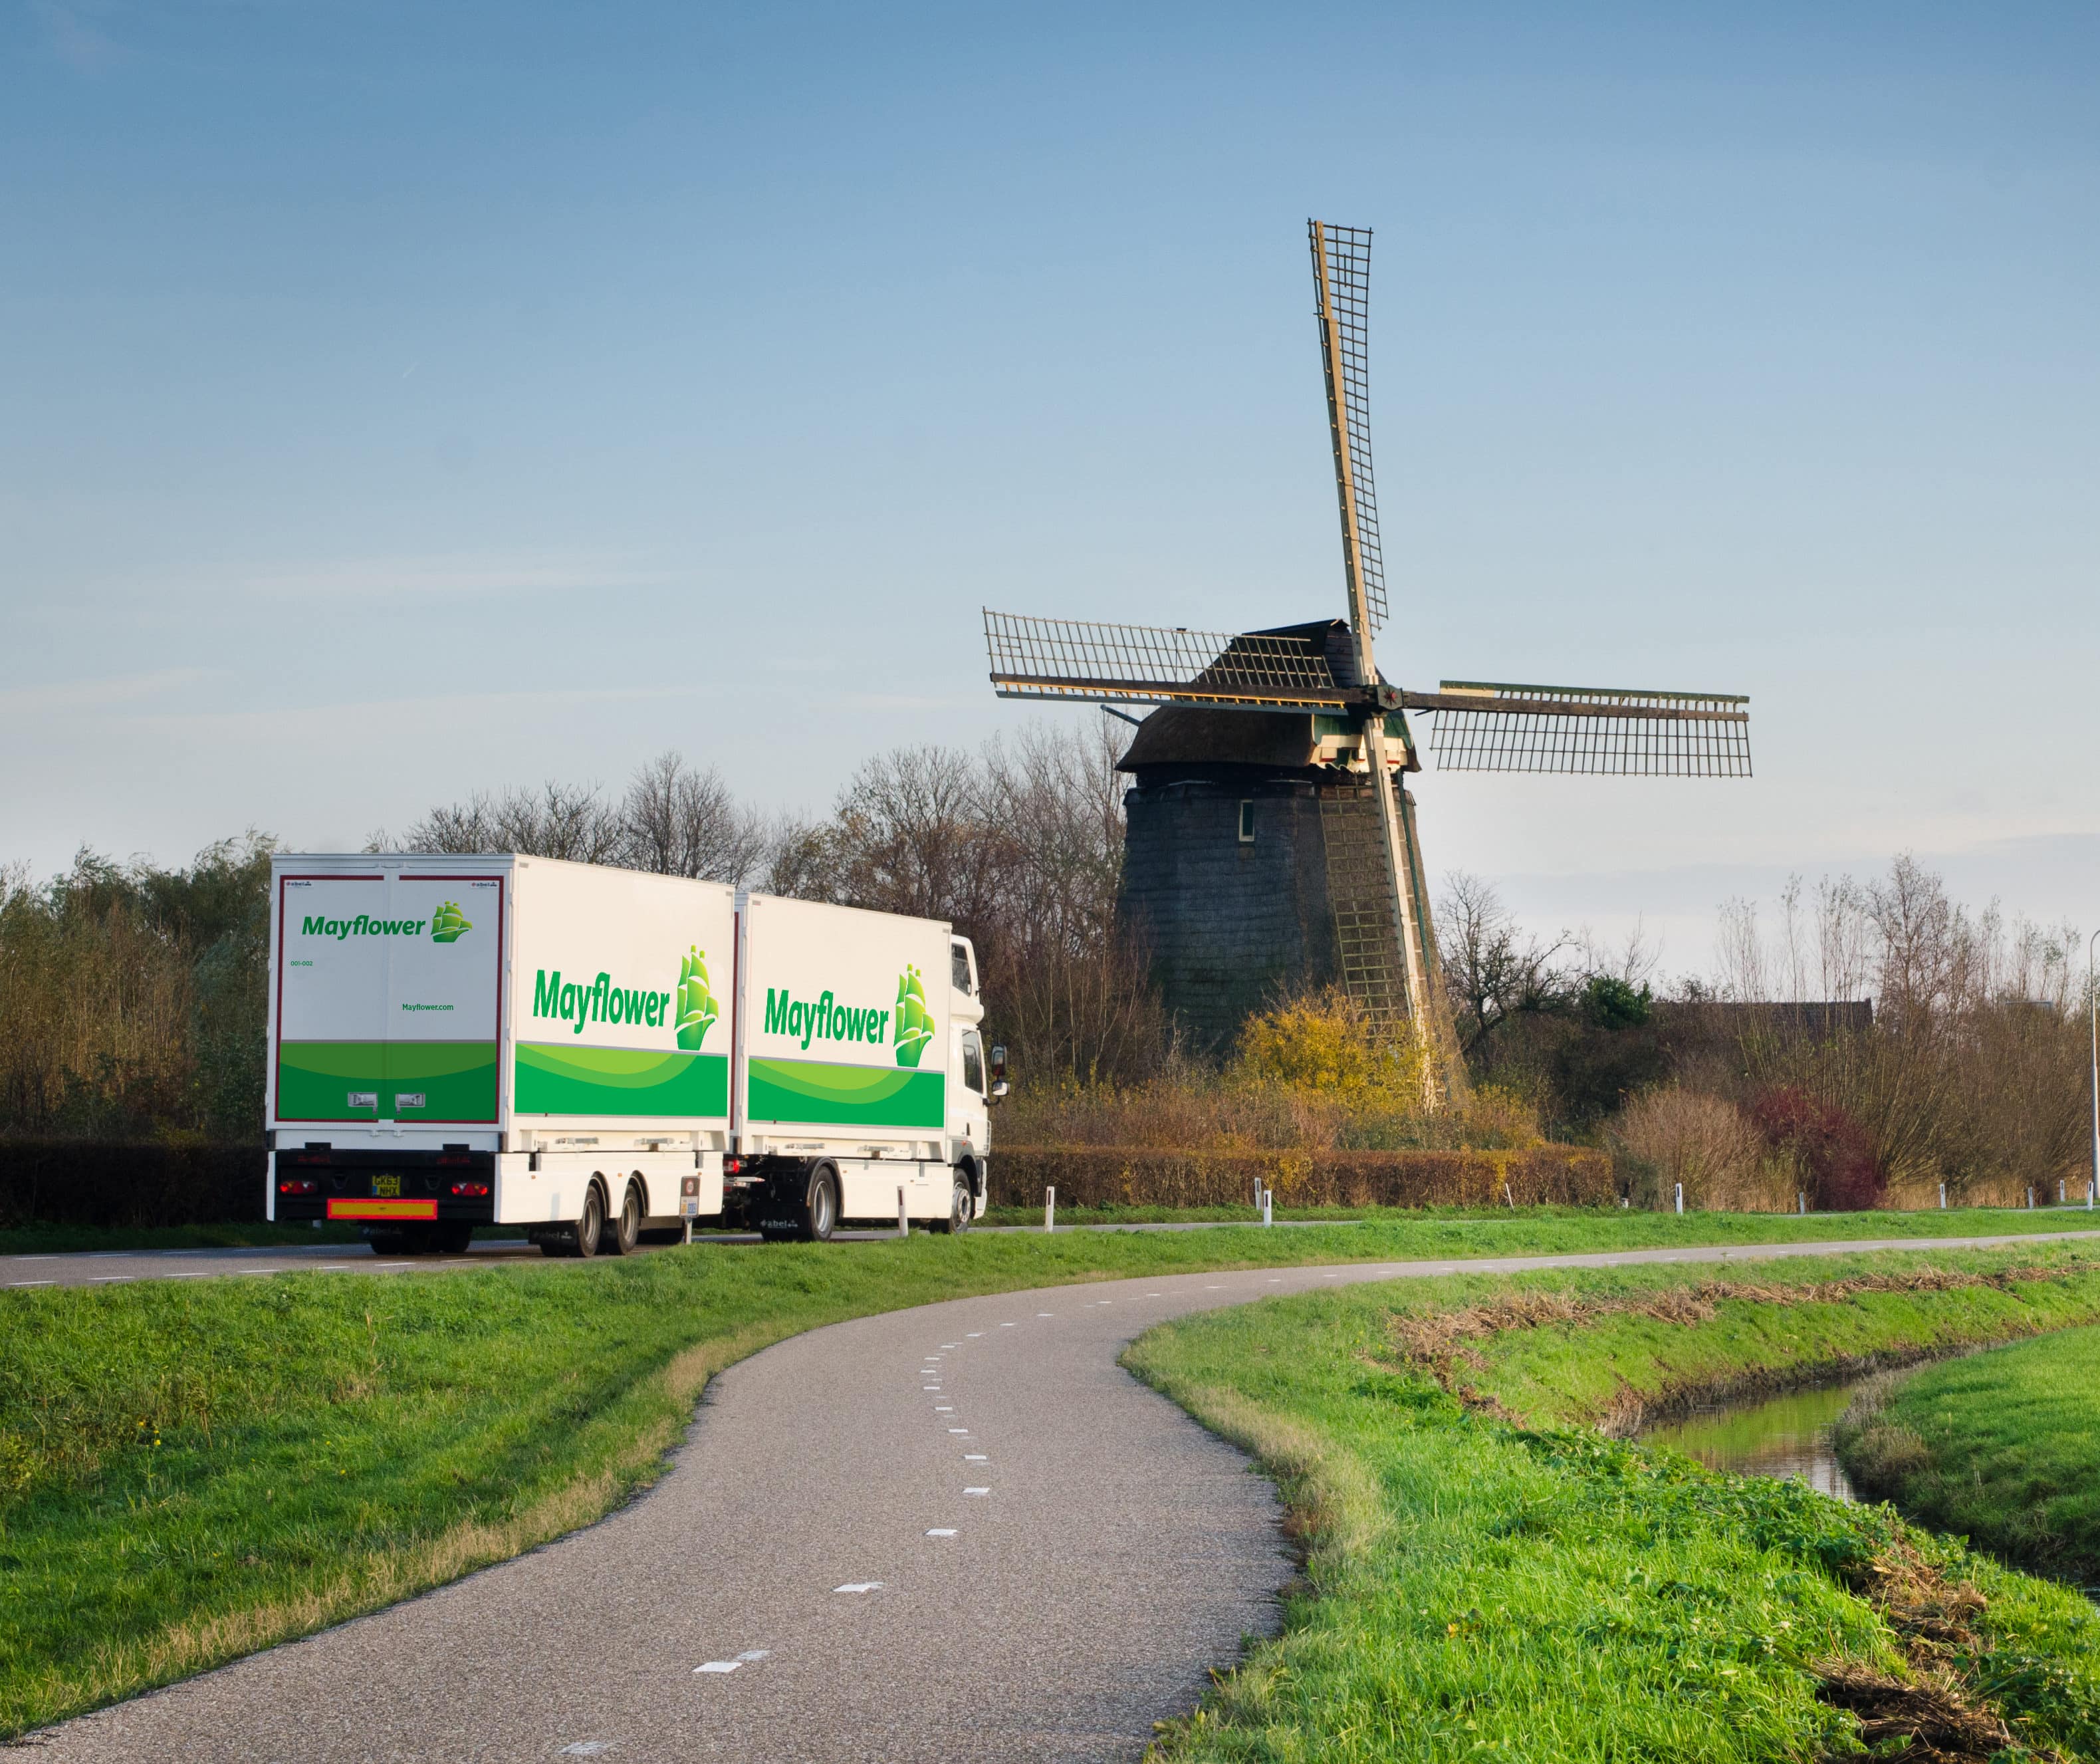 International Movers - Mayflower truck driving down a rural road passing a wooden windmill - Mayflower®